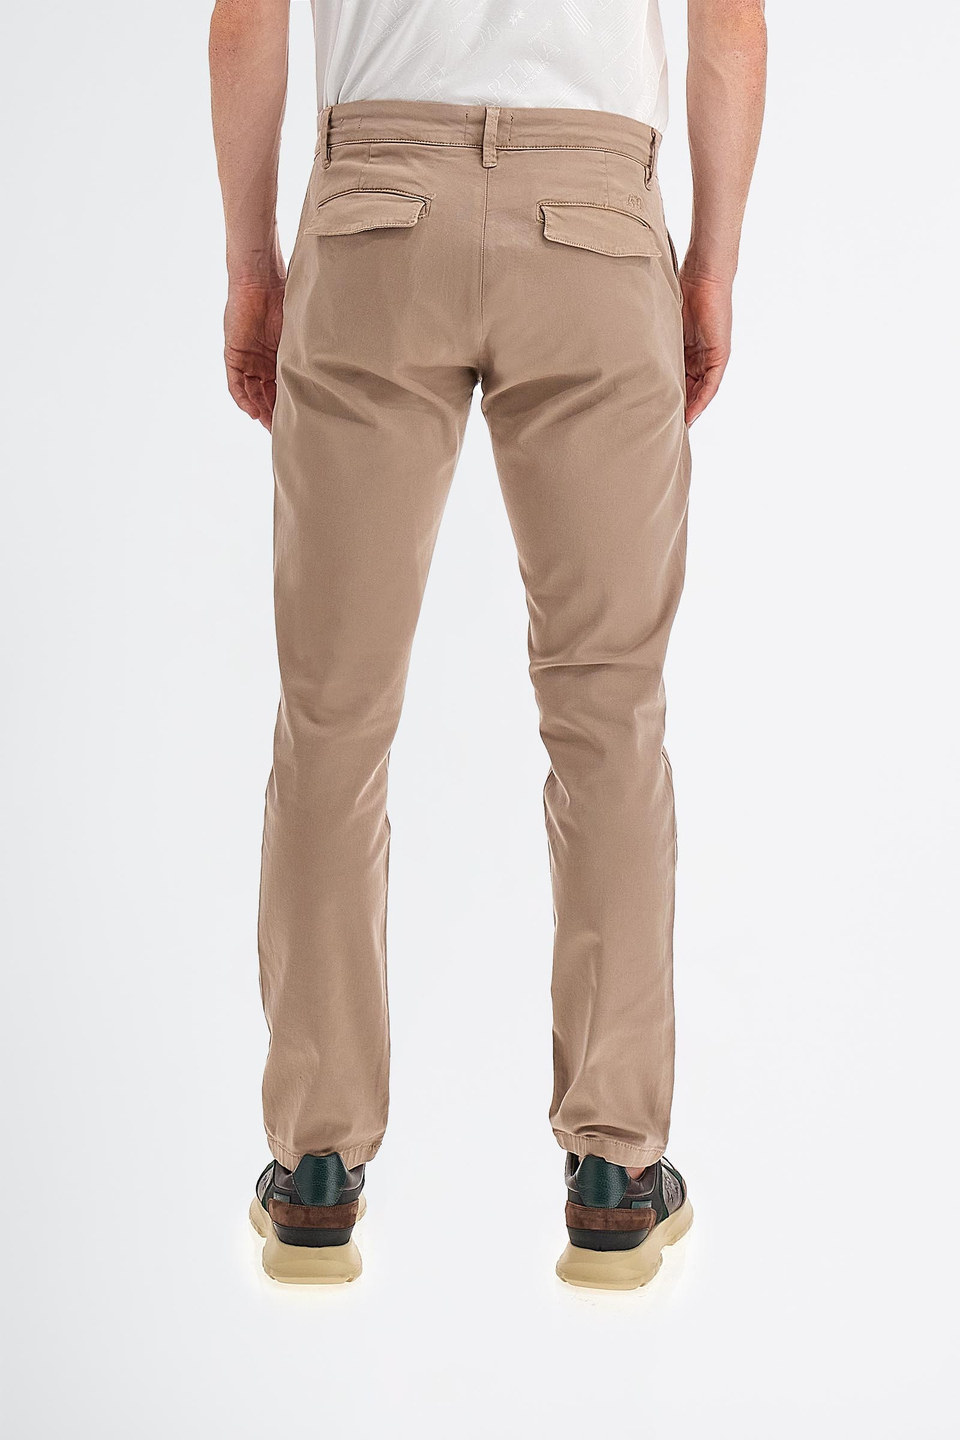 Slim fit chino stretch cotton trousers for men | La Martina - Official Online Shop